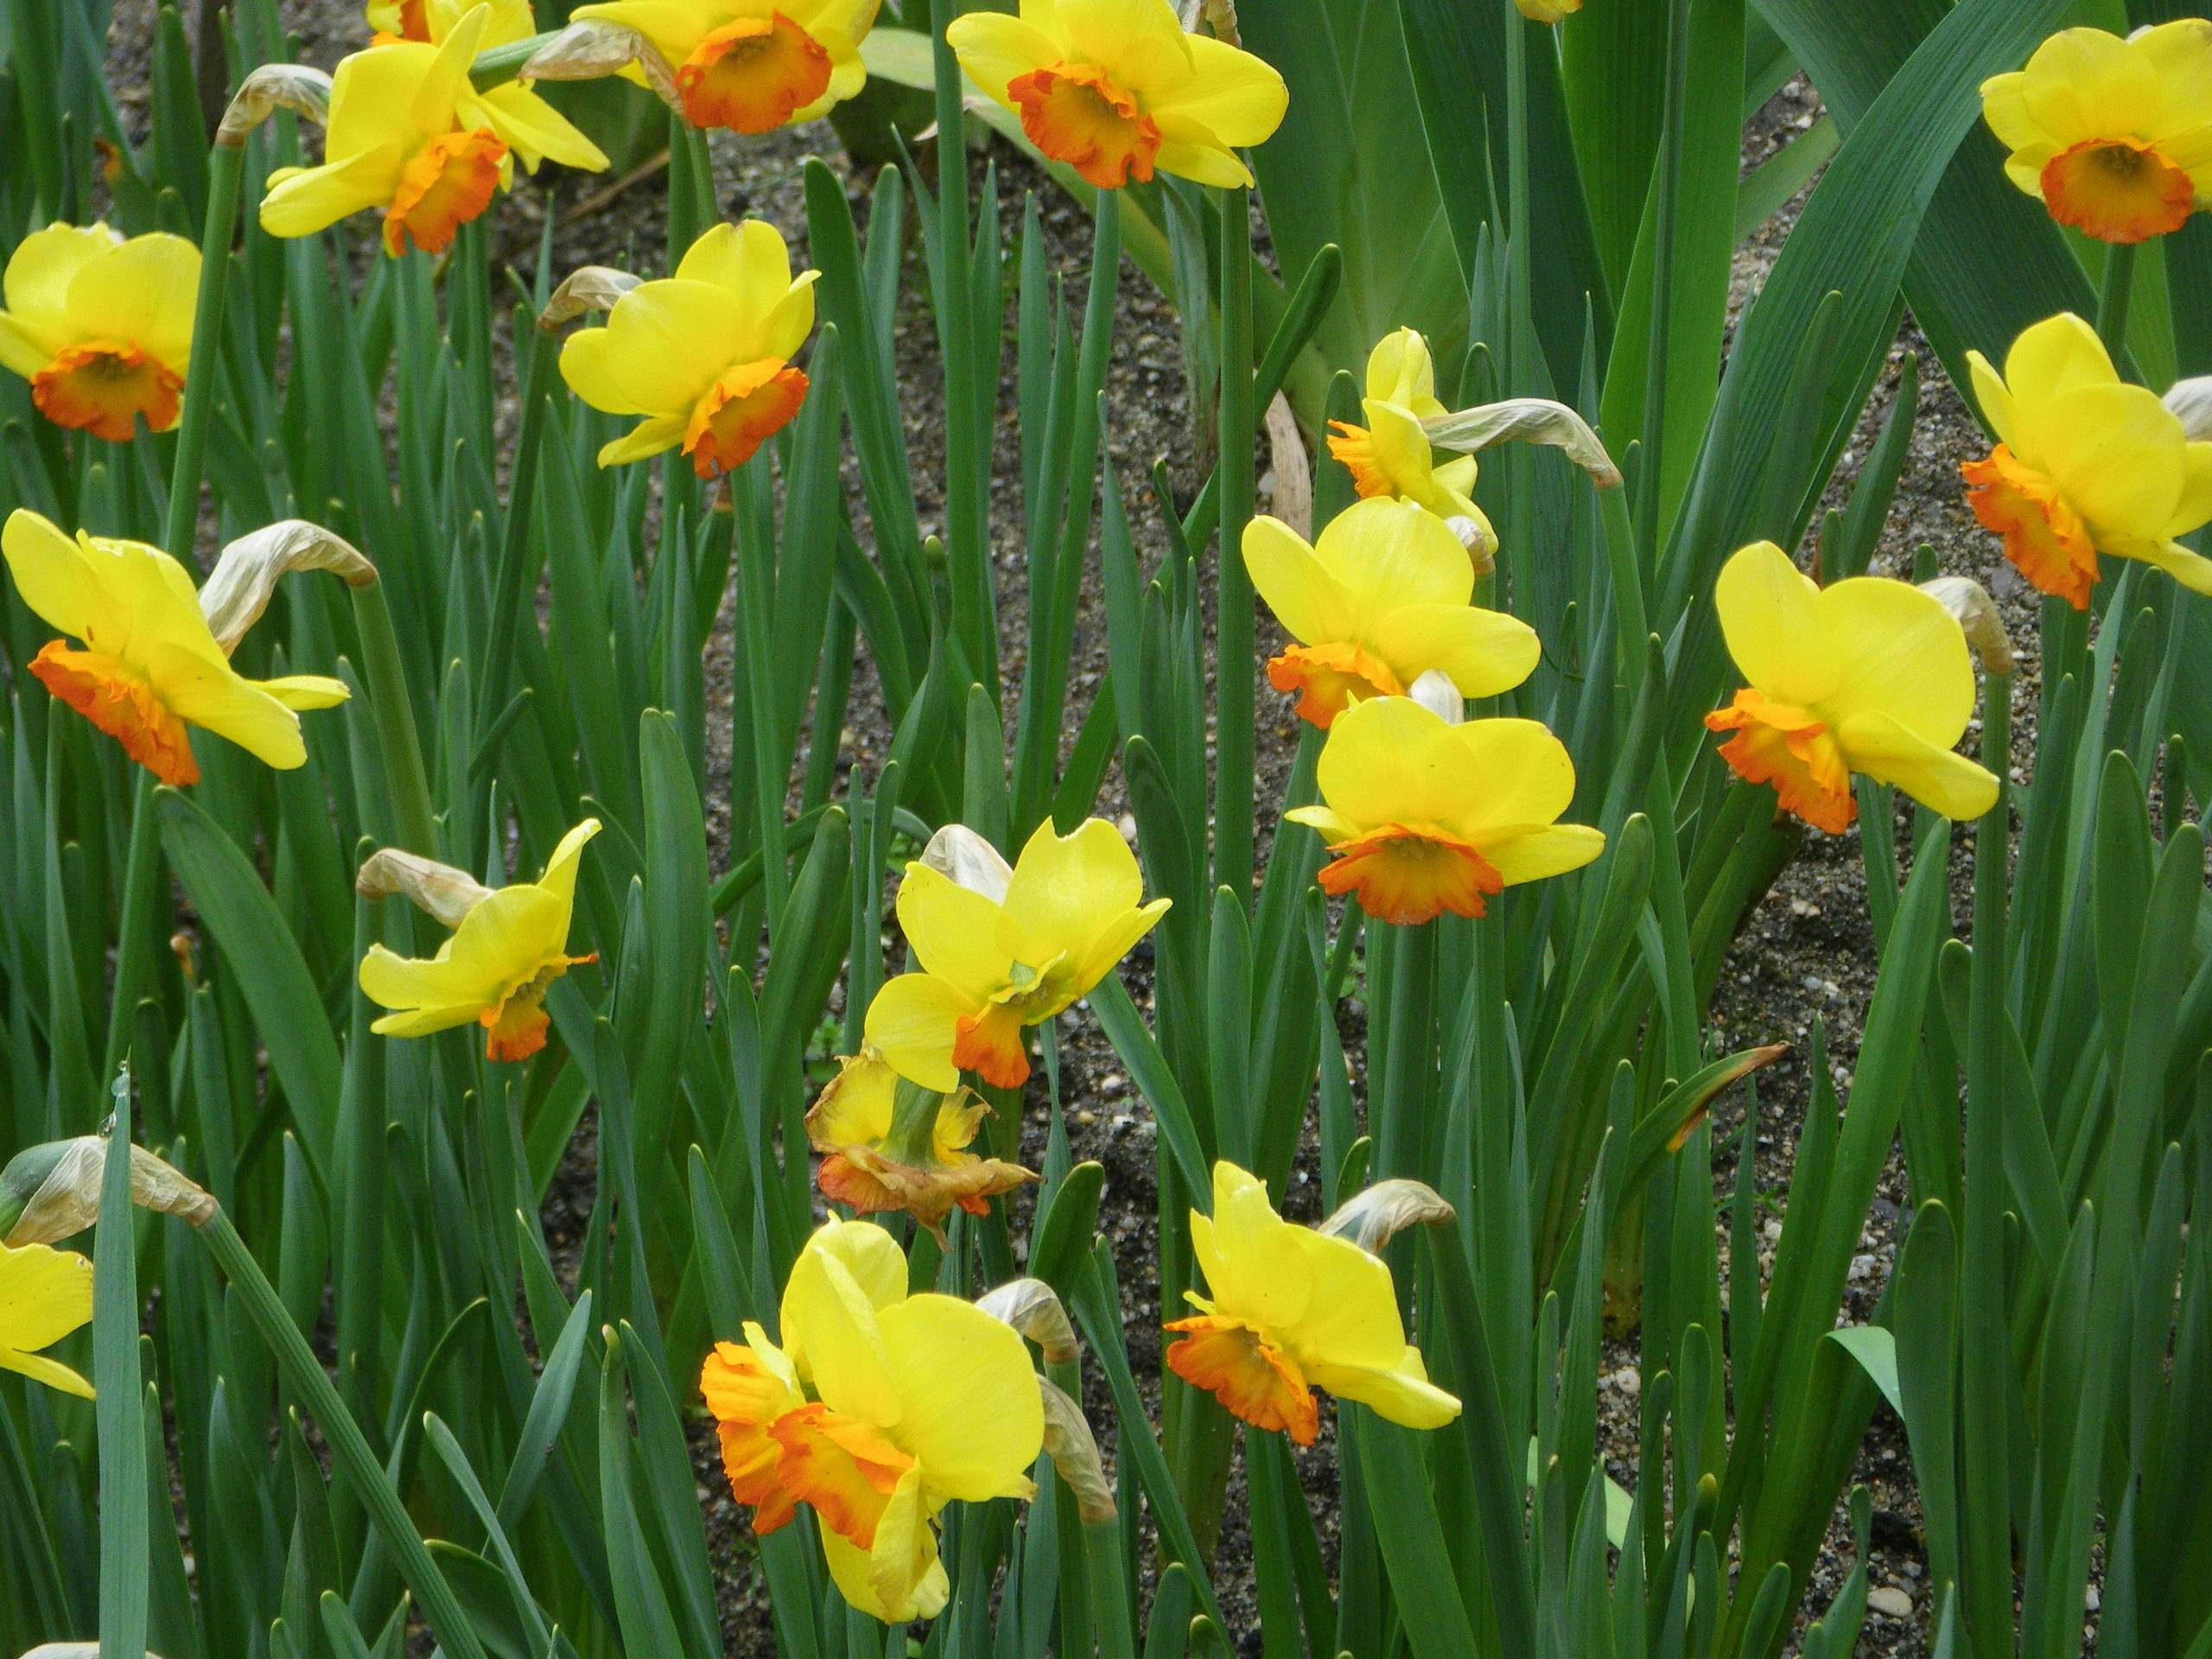 yellow-orange flowers with green leaves and stems